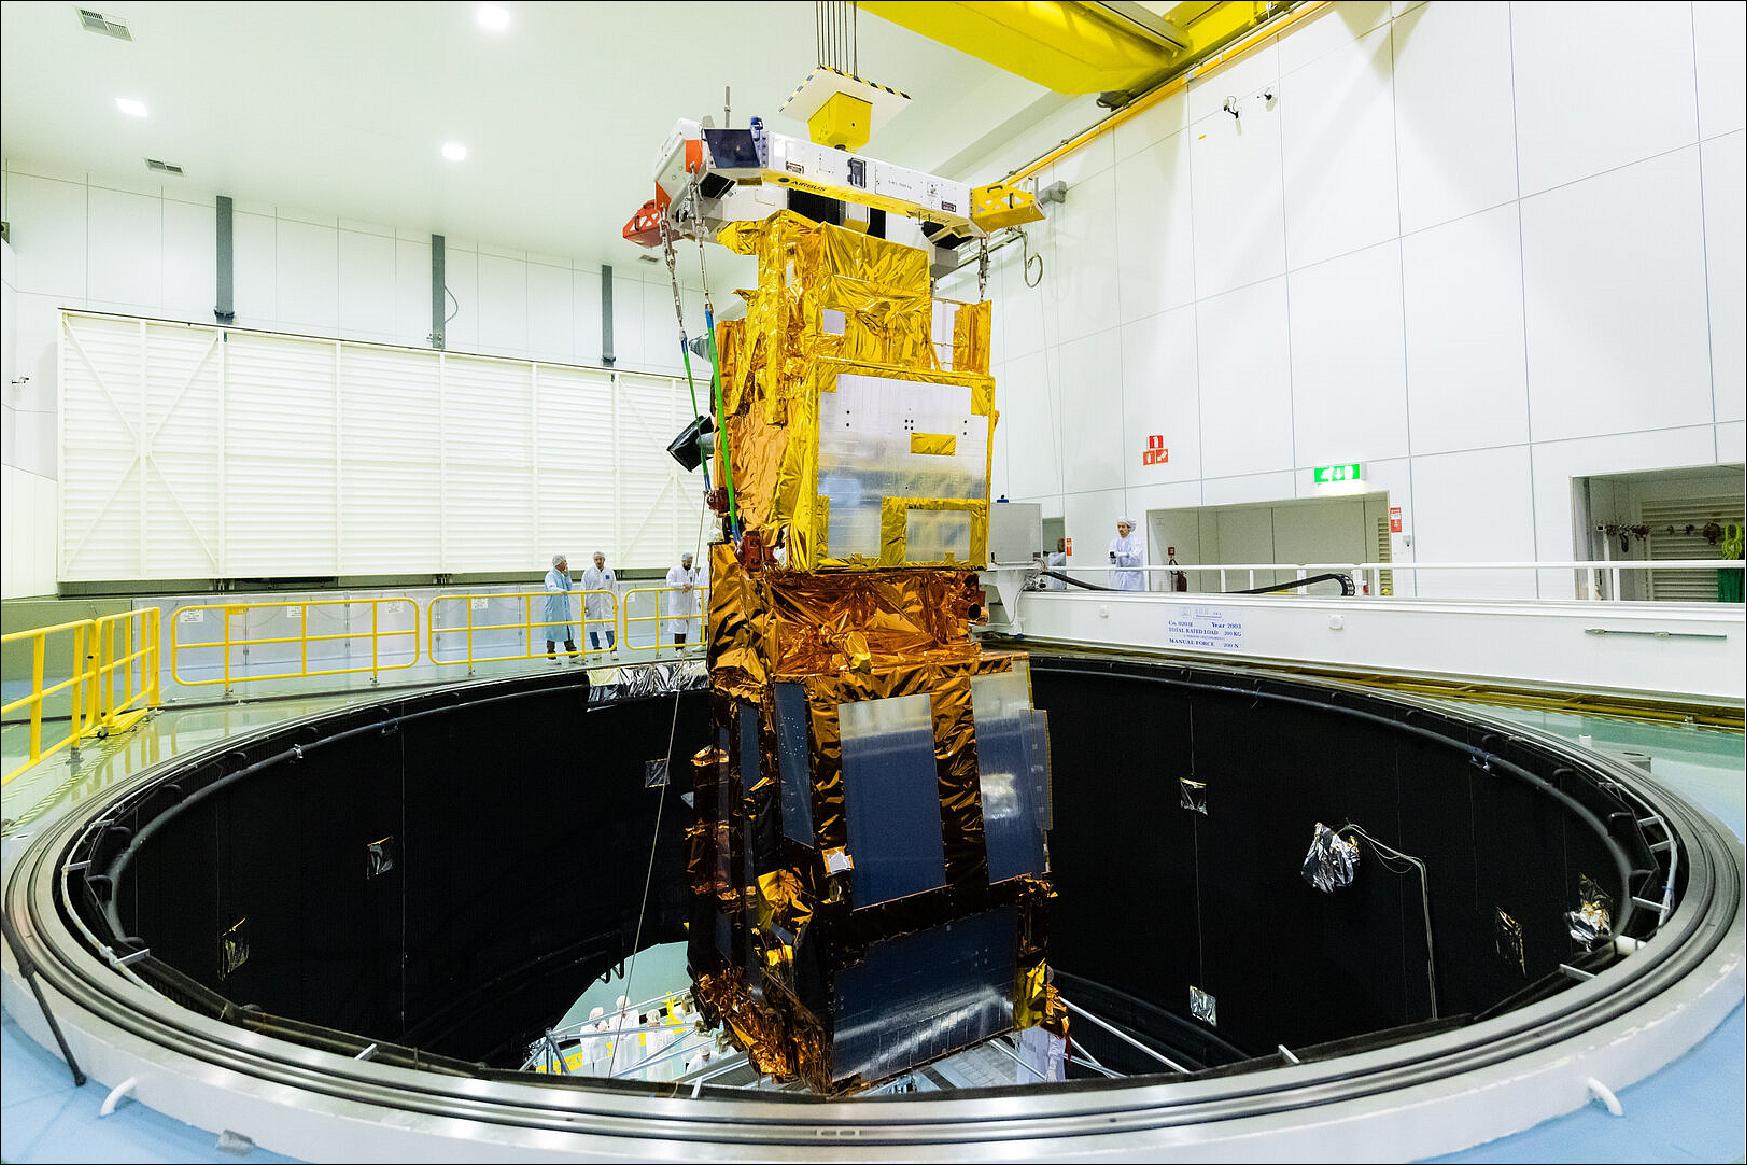 Figure 7: MetOp -SG structural and thermal model being lowered into ESA's LSS (Large Space Simulator), the largest vacuum chamber in Europe, ahead of thermal vacuum testing during summer 2019 (image credit: ESA, SJM Photography)